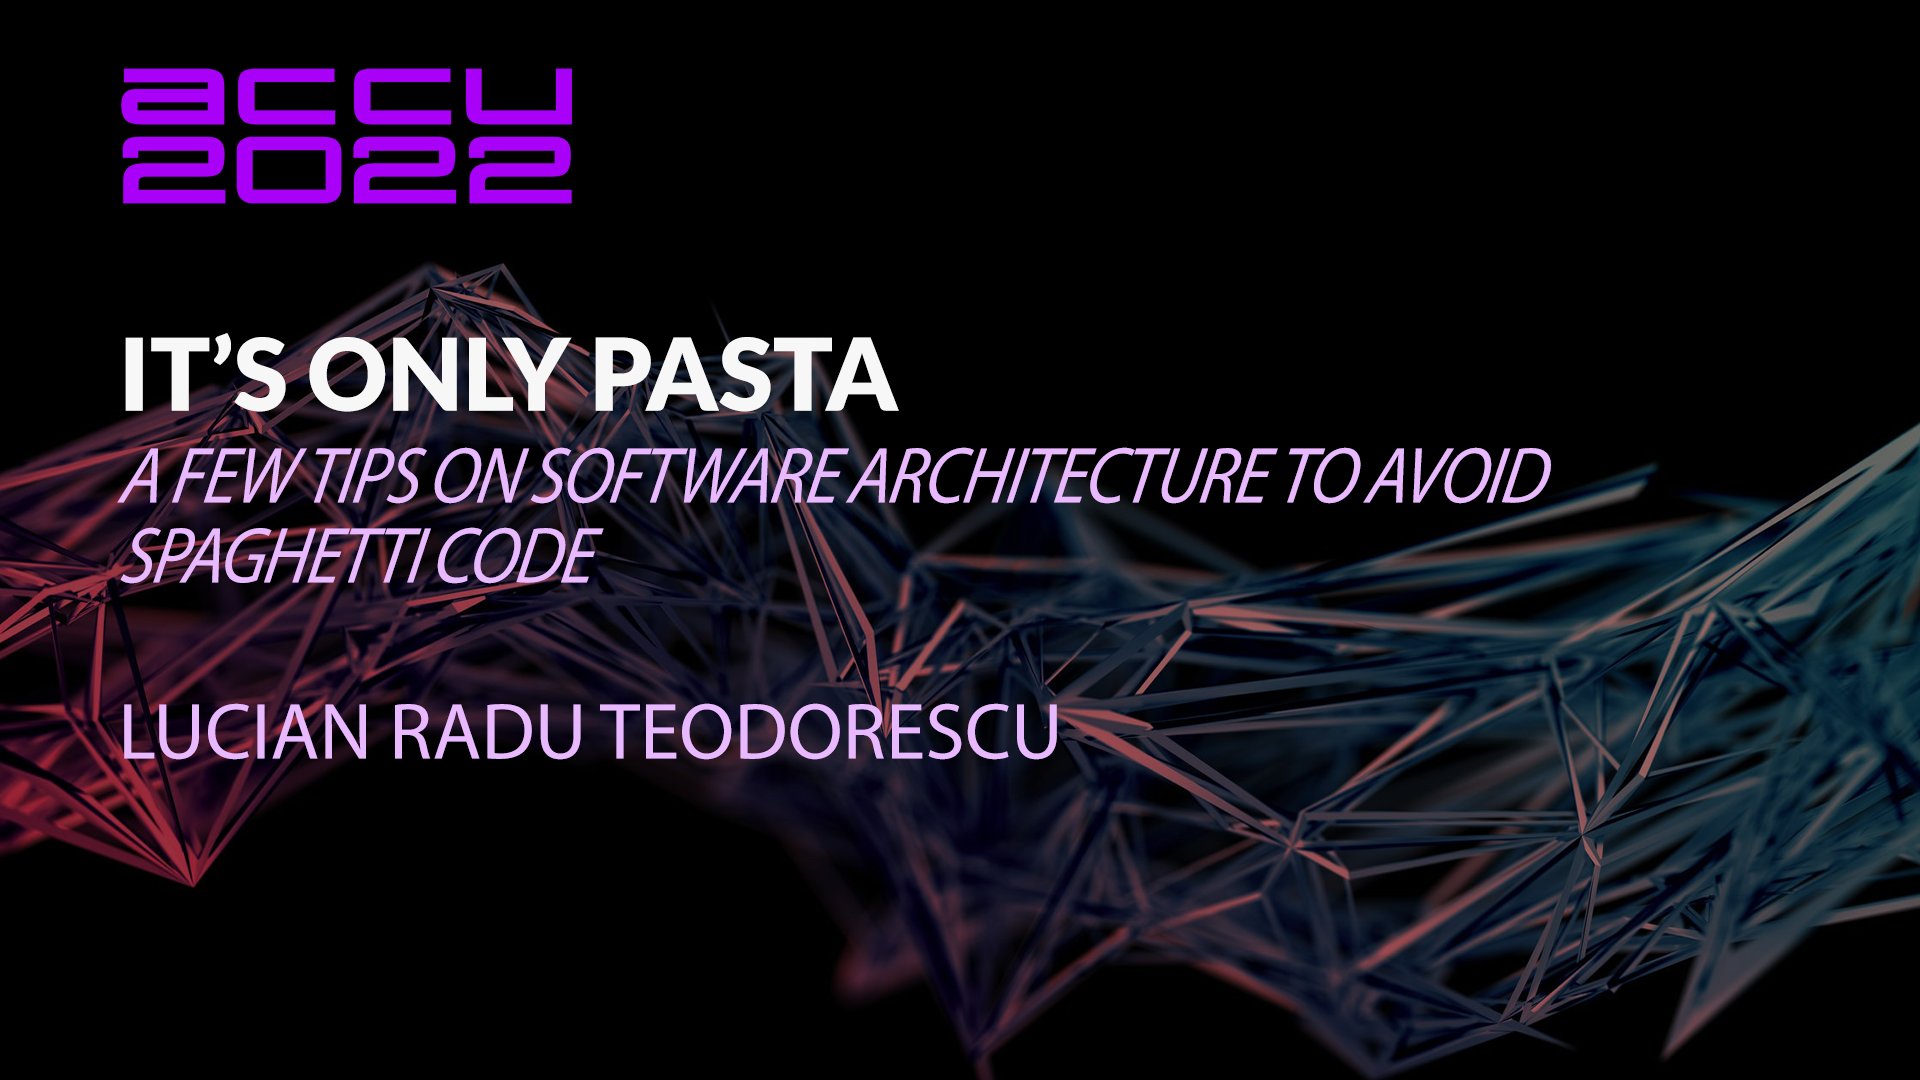 It's Only Pasta: a Few Tips on Software Architecture to Avoid Spaghetti Code